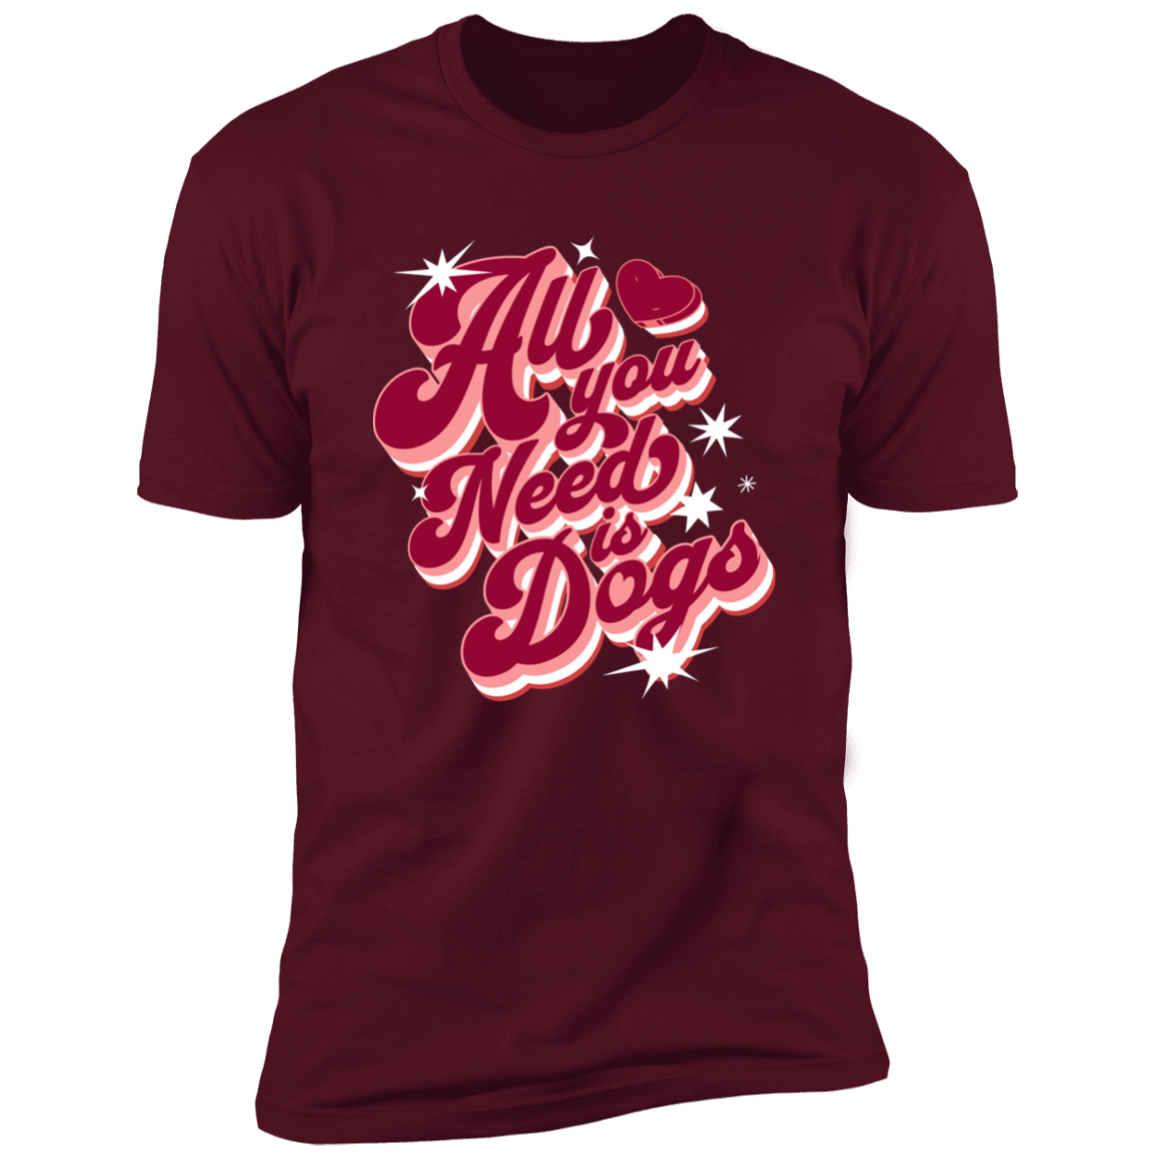 All I Need is Dogs T-shirt, Dog Shirt for humans, in maroon